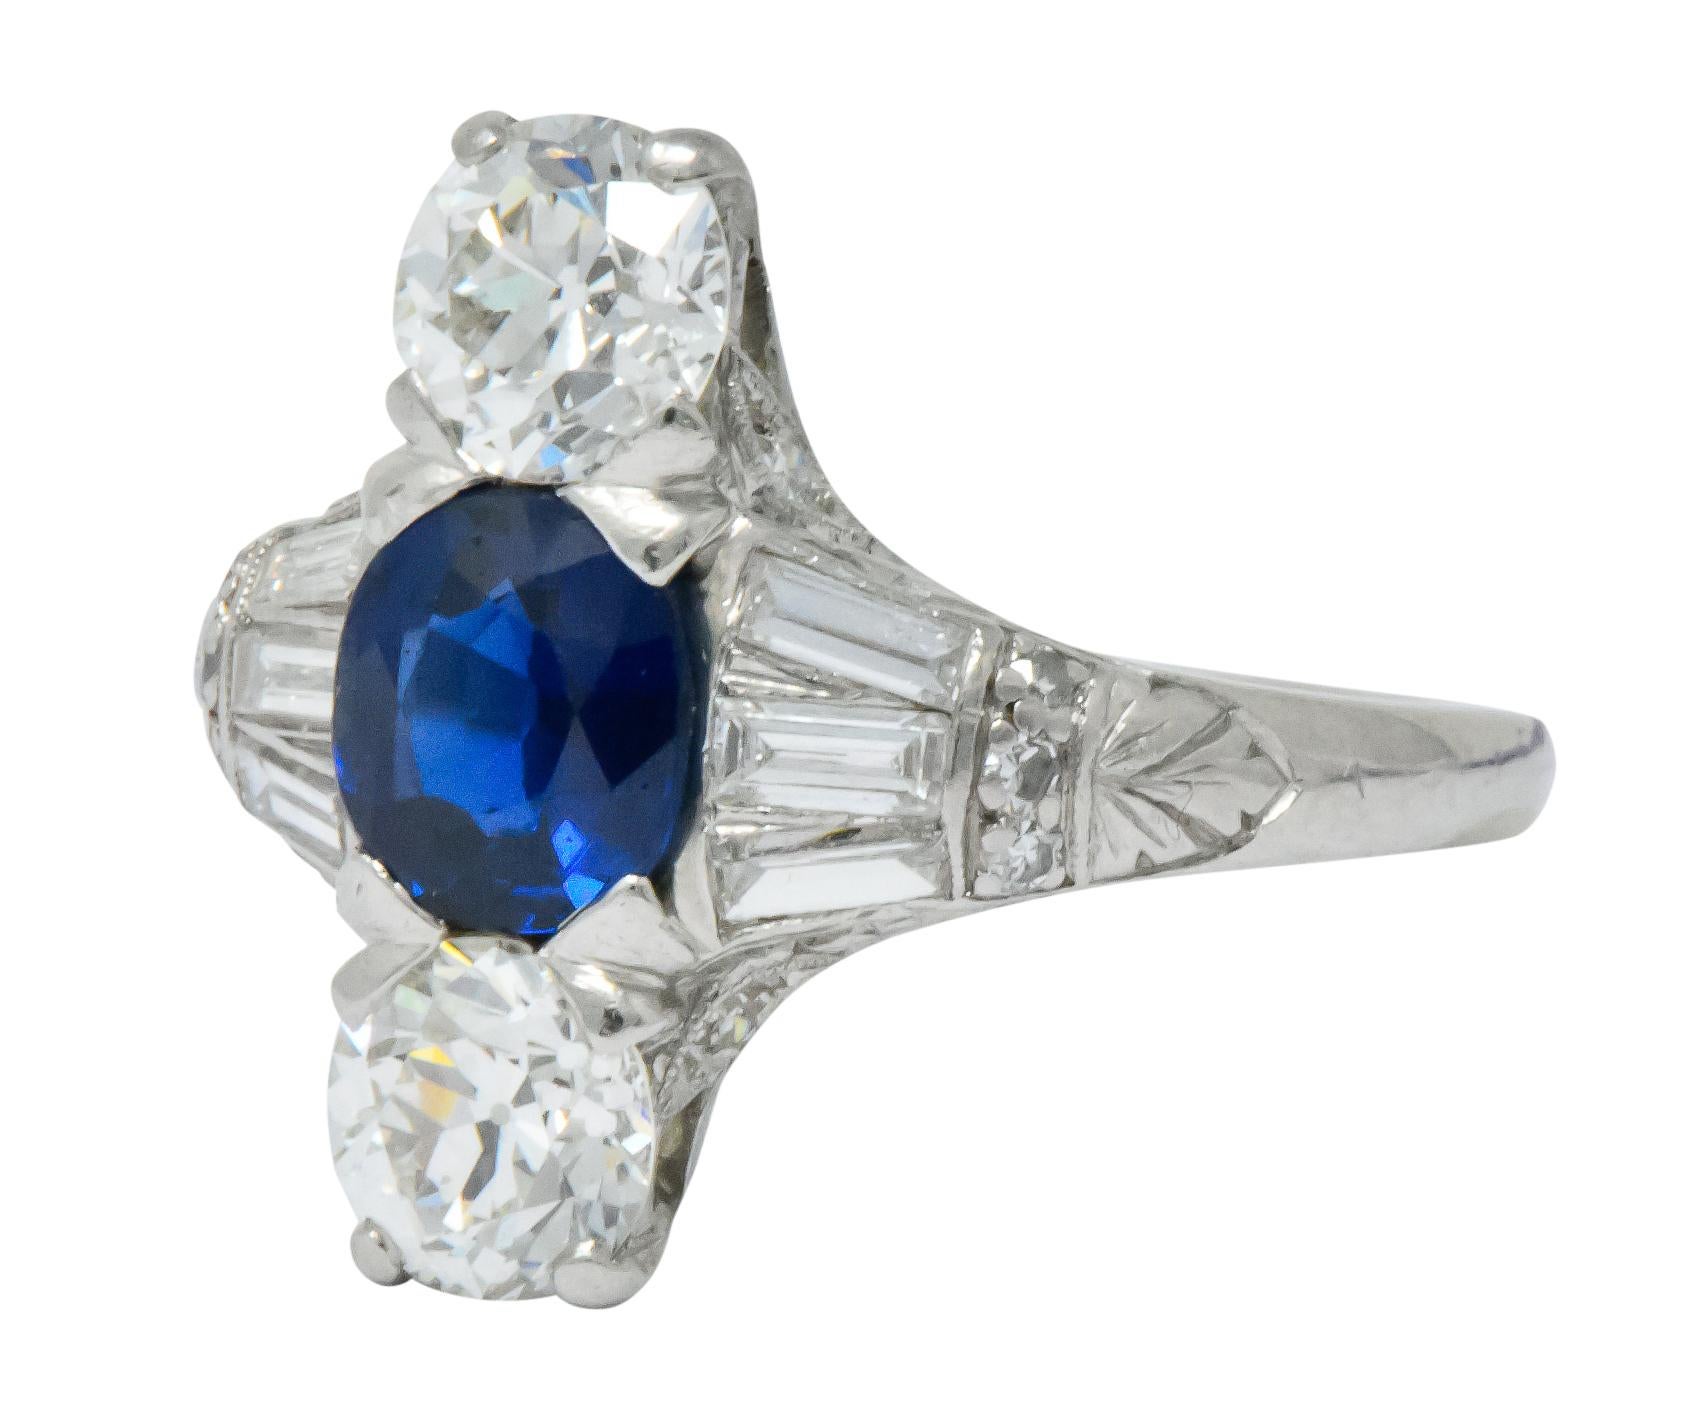 Centering a Cambodian oval sapphire weighing 1.10 carats, deep royal blue with no evidence of heat treatment

Accompanied by two old European cut diamonds, weighing approximately 1.20 carats total, G/H color and VS clarity

Accented by single and